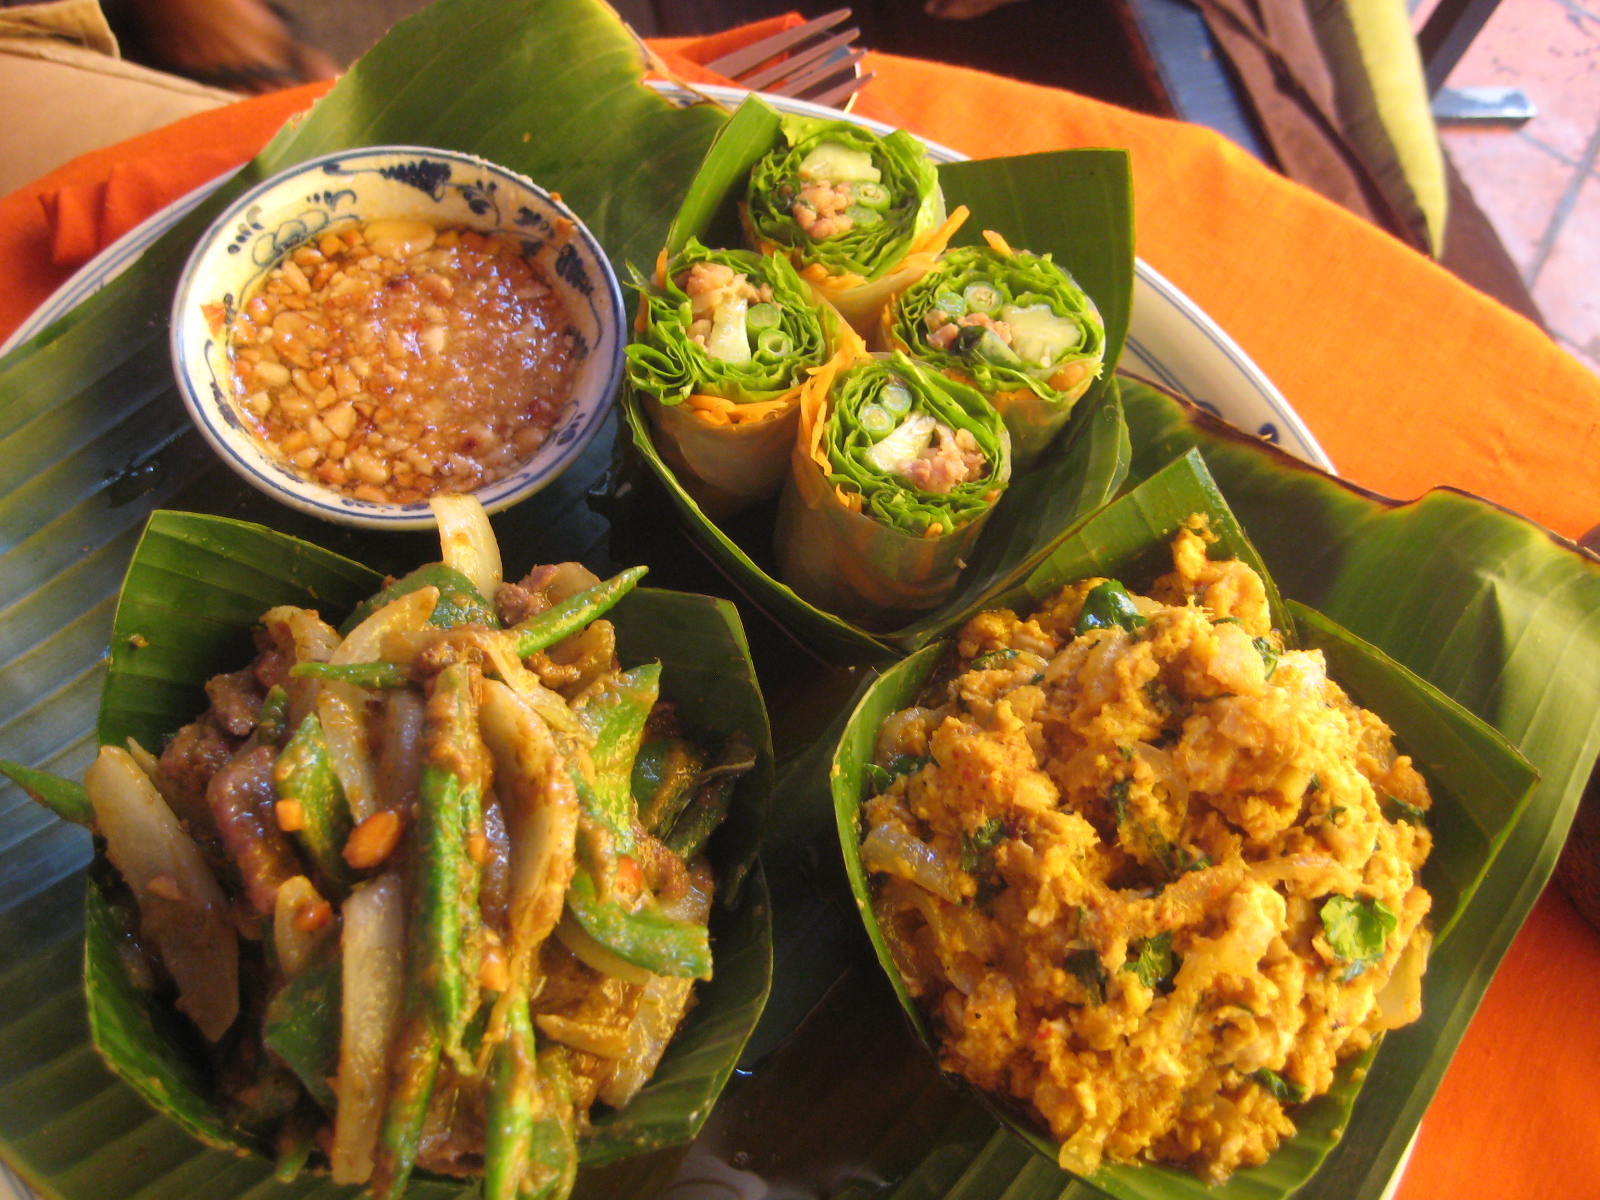 Cambodian Cuisine Vacation Packages- Tour Packages and Vacation | AOJourneys